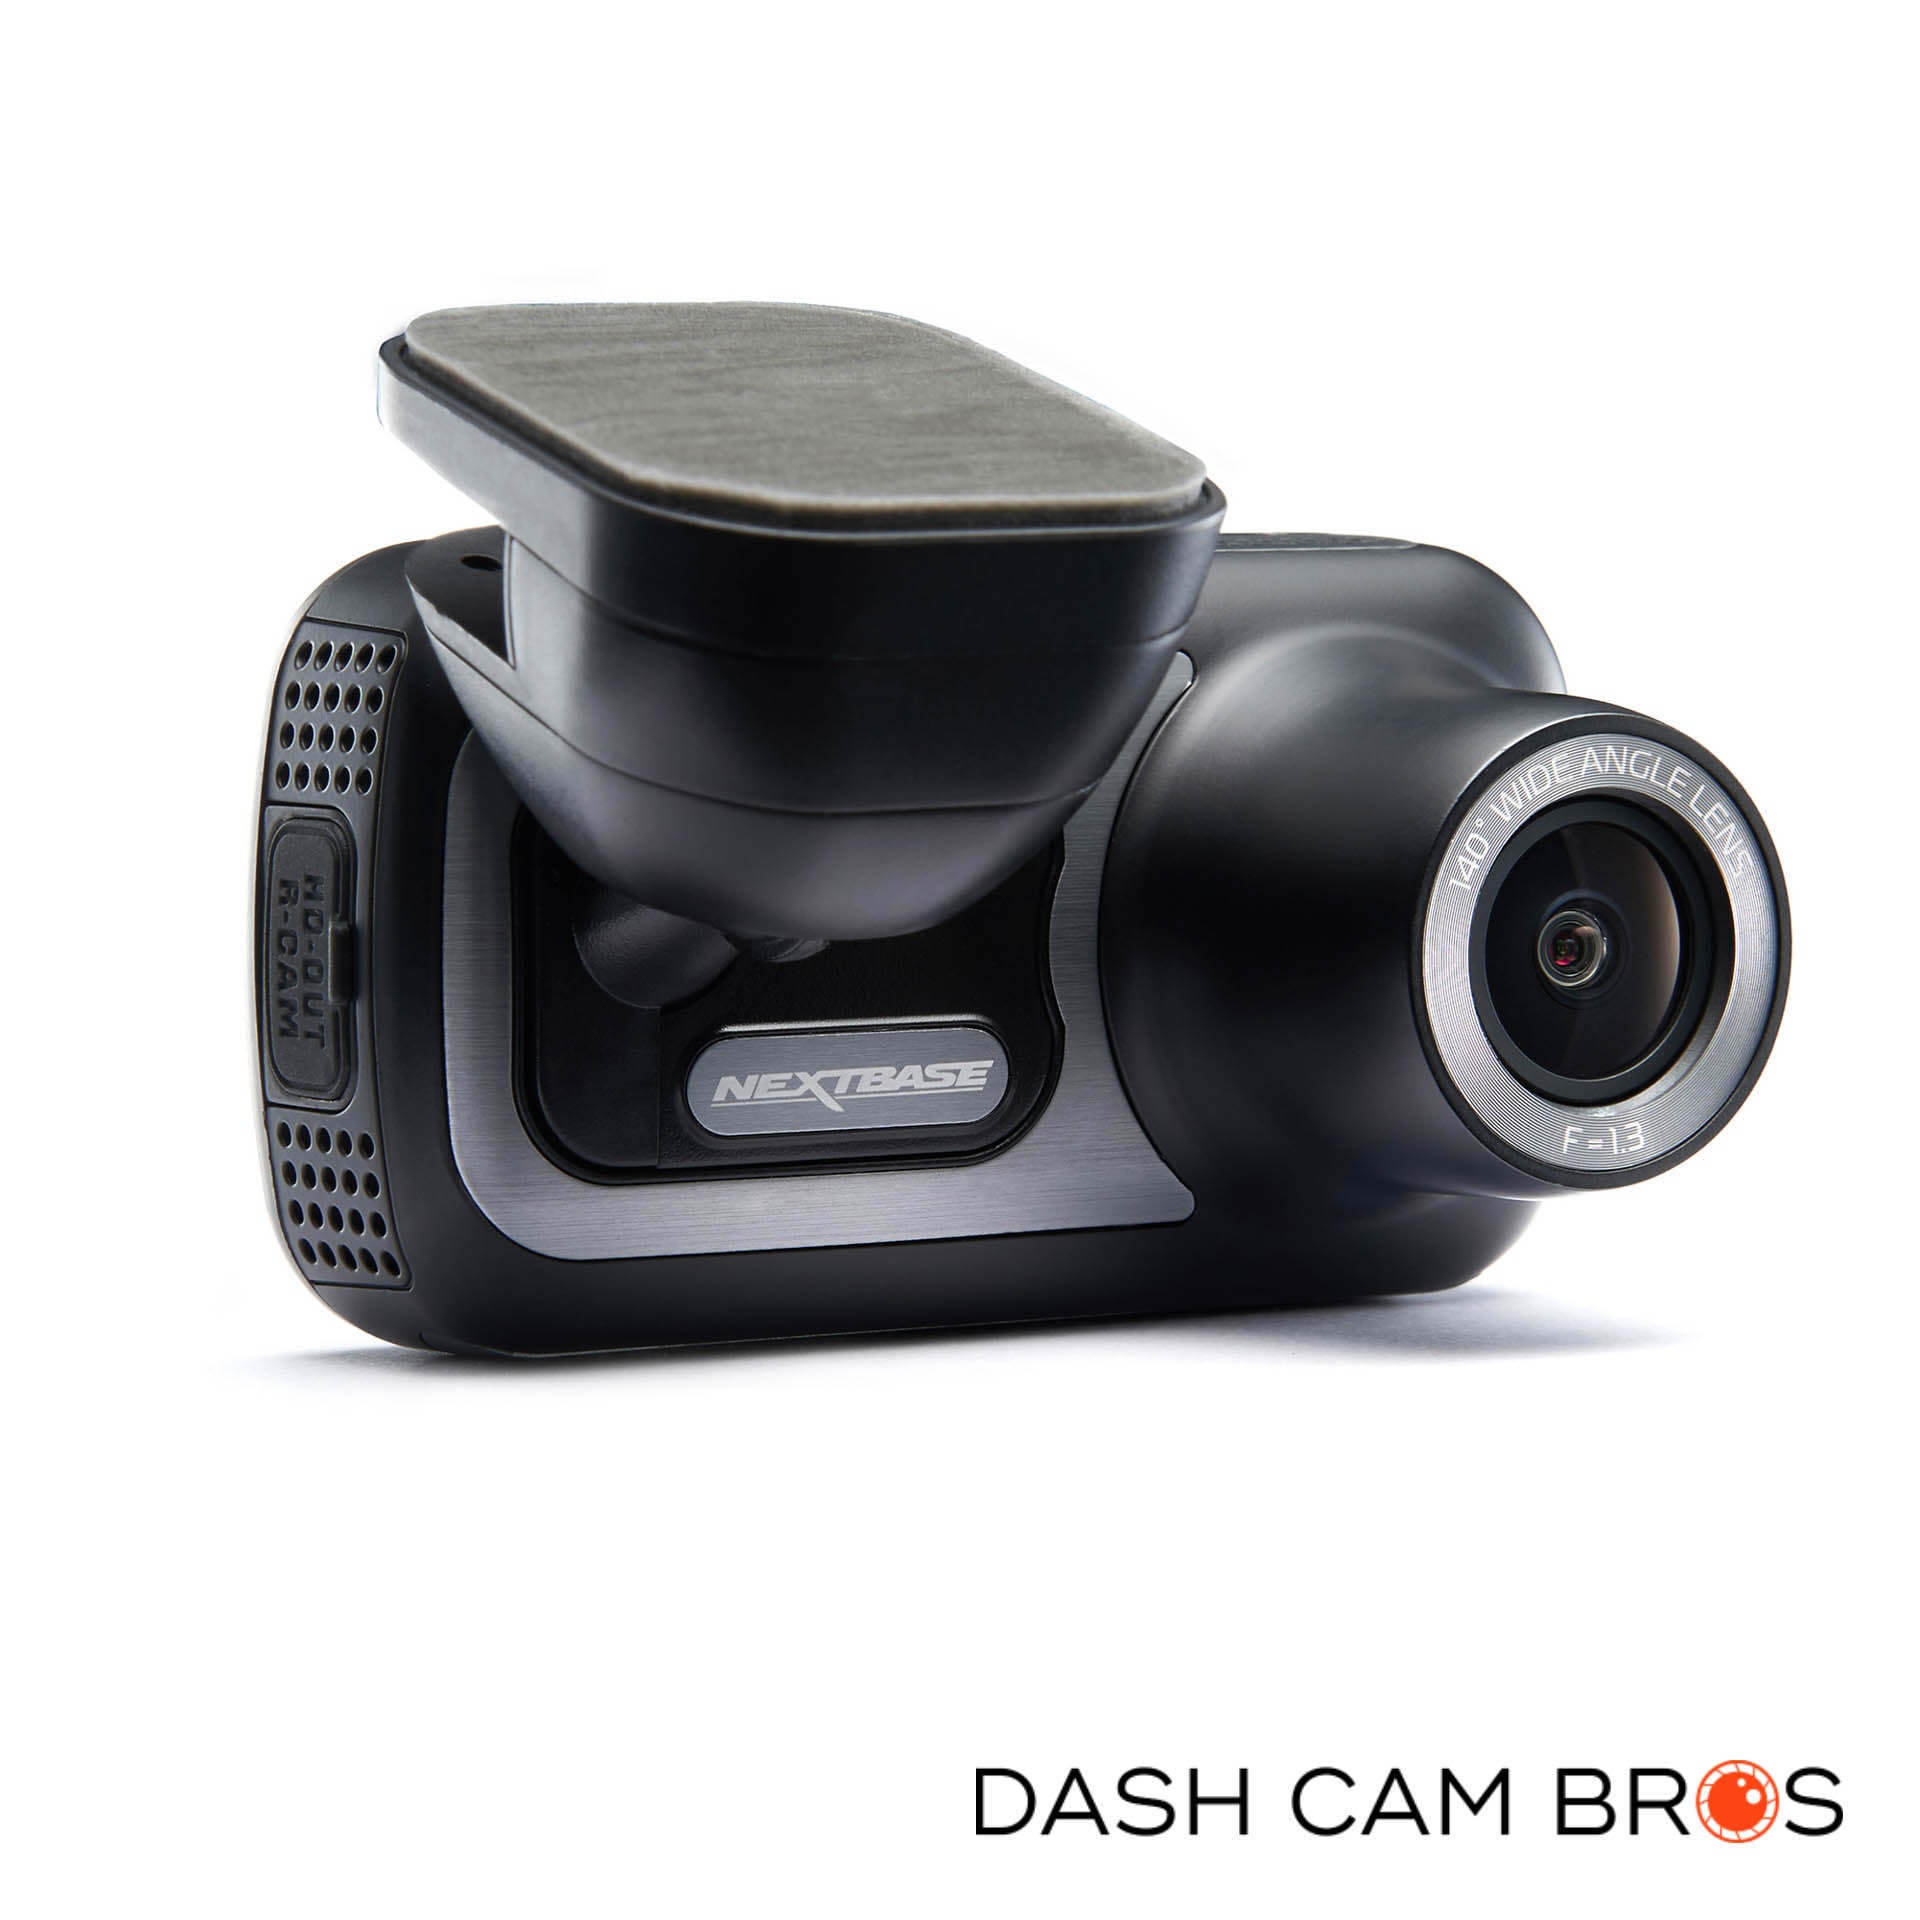  Nextbase 422GW Dash Cam Small with APP- Full 1440p/30fps Quad  HD Recording in Car Camera-  Alexa Voice Control- WiFi GPS Bluetooth-  Parking Mode- Night Vision- Polarizing Filter Compatible : Electronics